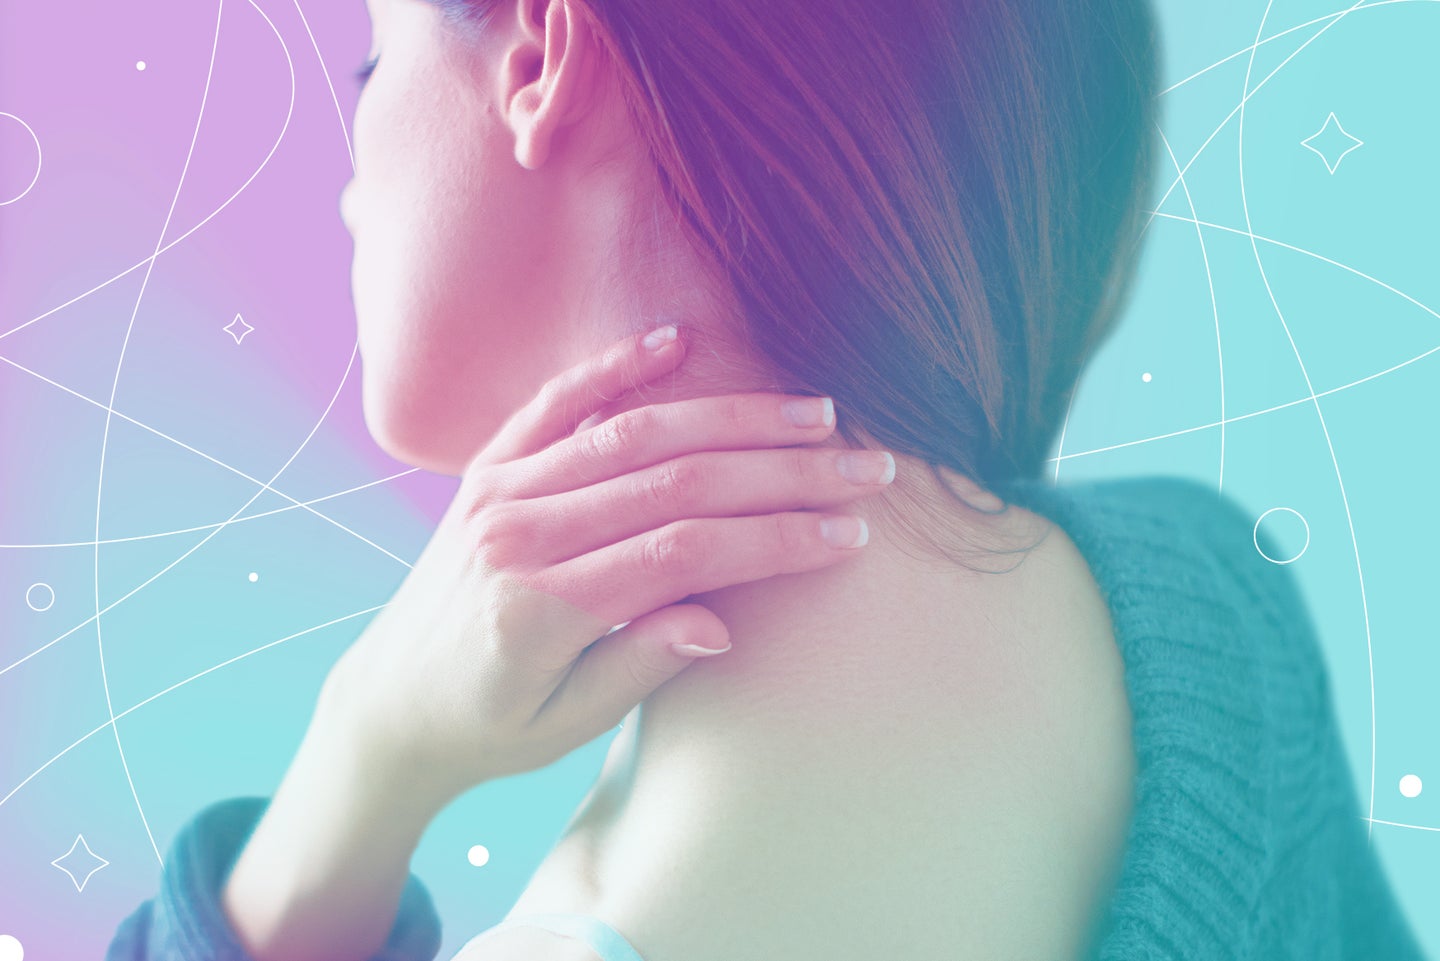 A woman rubs her neck with her fingers in front of a pink and blue background